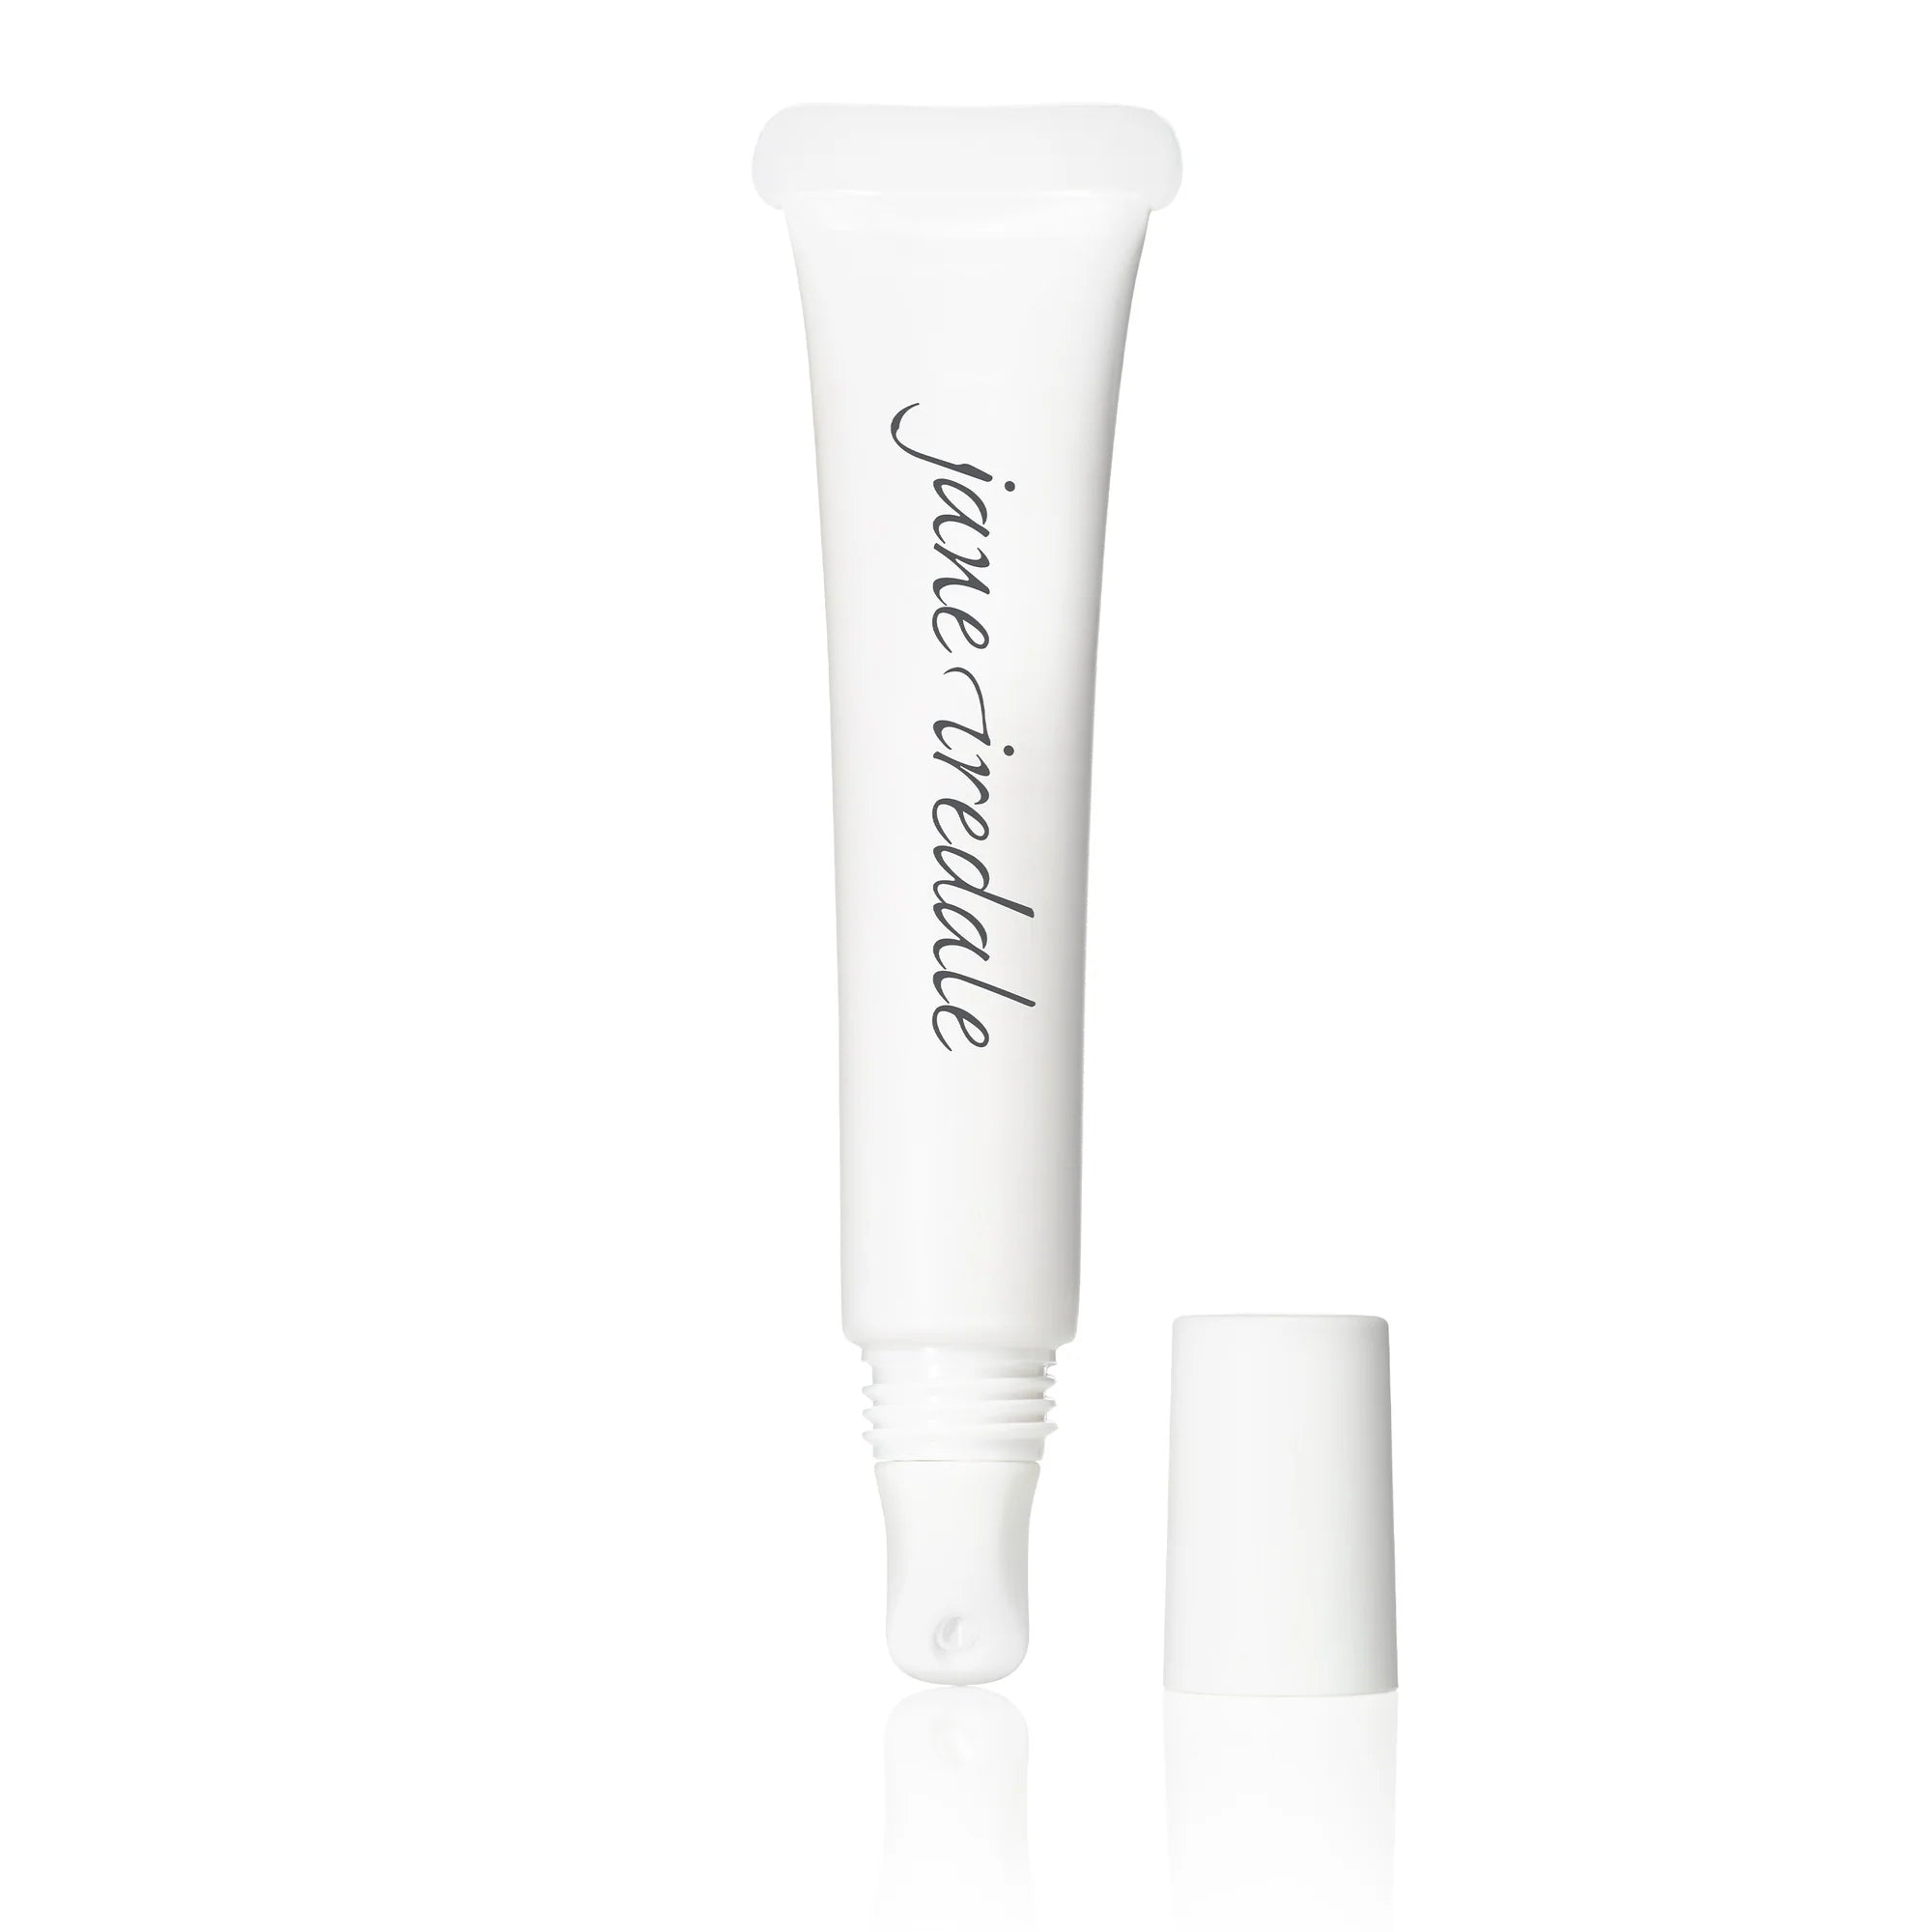 Jane Iredale's HydroPure Hyaluronic Lip Treatment is an instant relief for chapped lips, designed to soothe, smooth, and soften. 